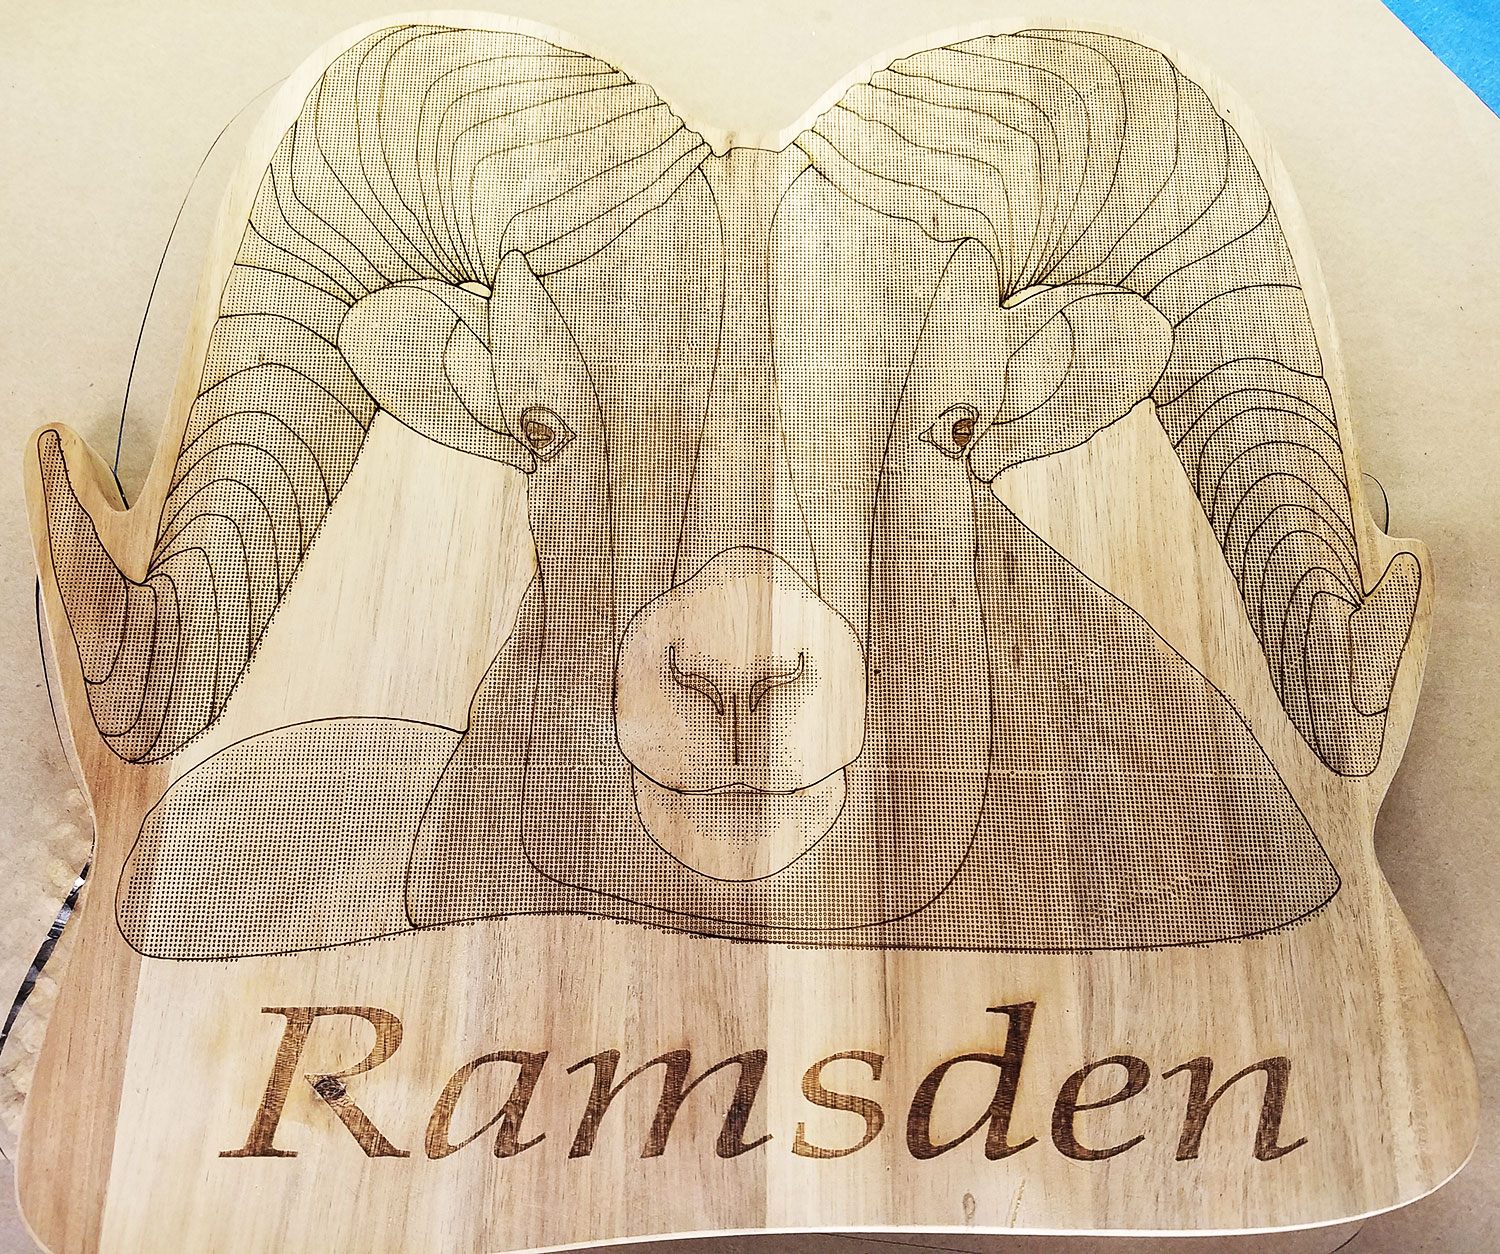 lasered image of a Ram's head on wood.